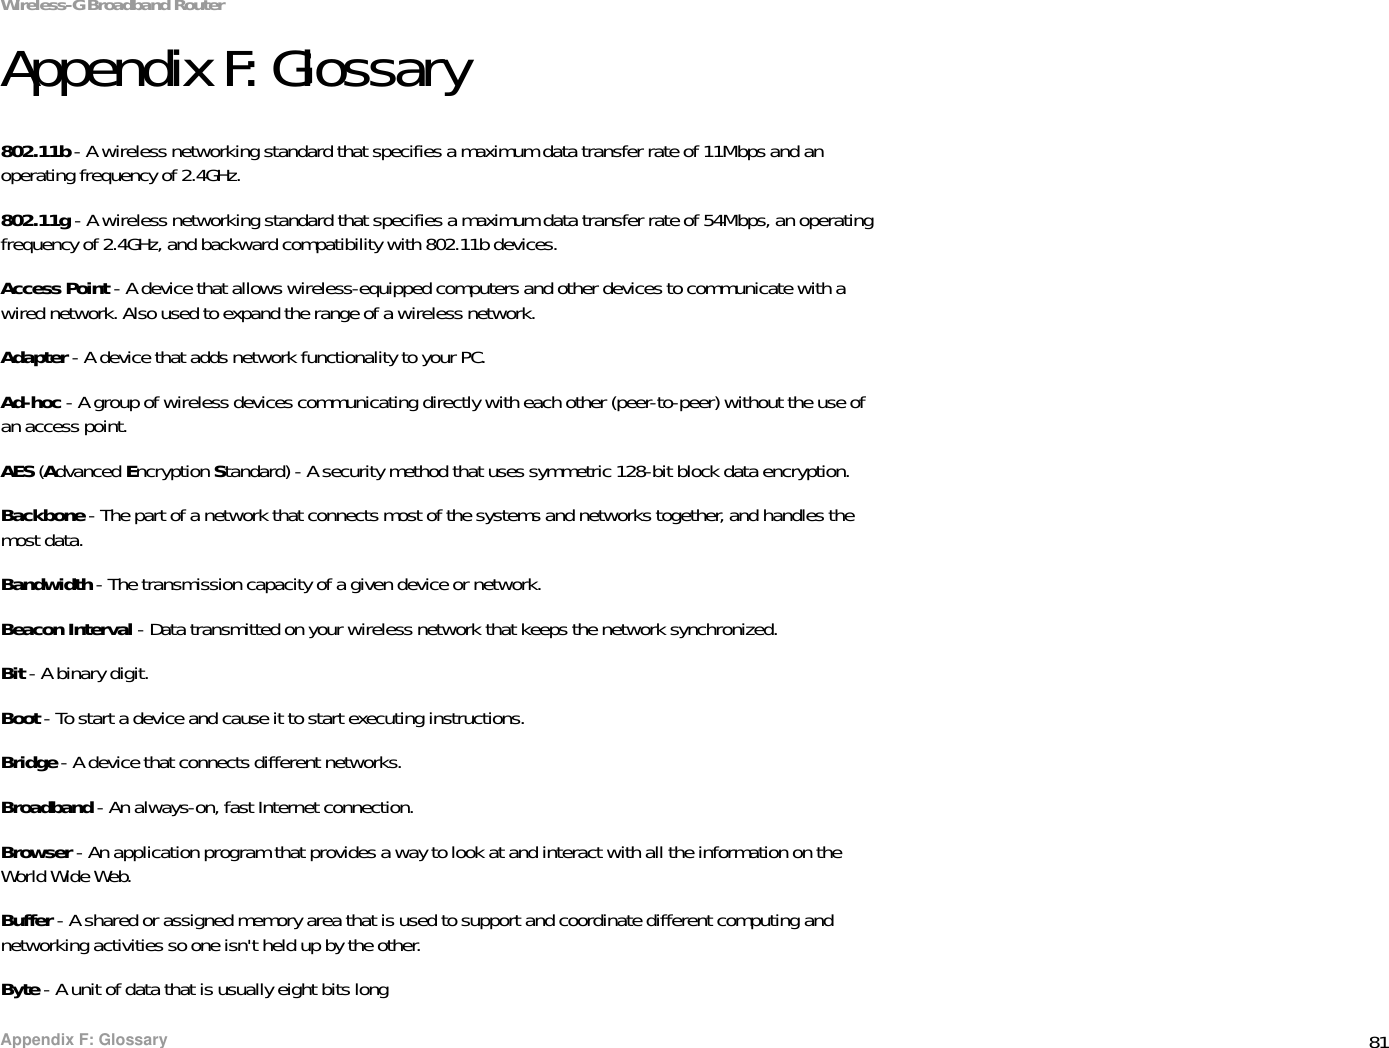 81Appendix F: GlossaryWireless-G Broadband RouterAppendix F: Glossary802.11b - A wireless networking standard that specifies a maximum data transfer rate of 11Mbps and an operating frequency of 2.4GHz.802.11g - A wireless networking standard that specifies a maximum data transfer rate of 54Mbps, an operating frequency of 2.4GHz, and backward compatibility with 802.11b devices.Access Point - A device that allows wireless-equipped computers and other devices to communicate with a wired network. Also used to expand the range of a wireless network.Adapter - A device that adds network functionality to your PC.Ad-hoc - A group of wireless devices communicating directly with each other (peer-to-peer) without the use of an access point.AES (Advanced Encryption Standard) - A security method that uses symmetric 128-bit block data encryption.Backbone - The part of a network that connects most of the systems and networks together, and handles the most data.Bandwidth - The transmission capacity of a given device or network.Beacon Interval - Data transmitted on your wireless network that keeps the network synchronized.Bit - A binary digit.Boot - To start a device and cause it to start executing instructions.Bridge - A device that connects different networks. Broadband - An always-on, fast Internet connection.Browser - An application program that provides a way to look at and interact with all the information on the World Wide Web. Buffer - A shared or assigned memory area that is used to support and coordinate different computing and networking activities so one isn&apos;t held up by the other.Byte - A unit of data that is usually eight bits long